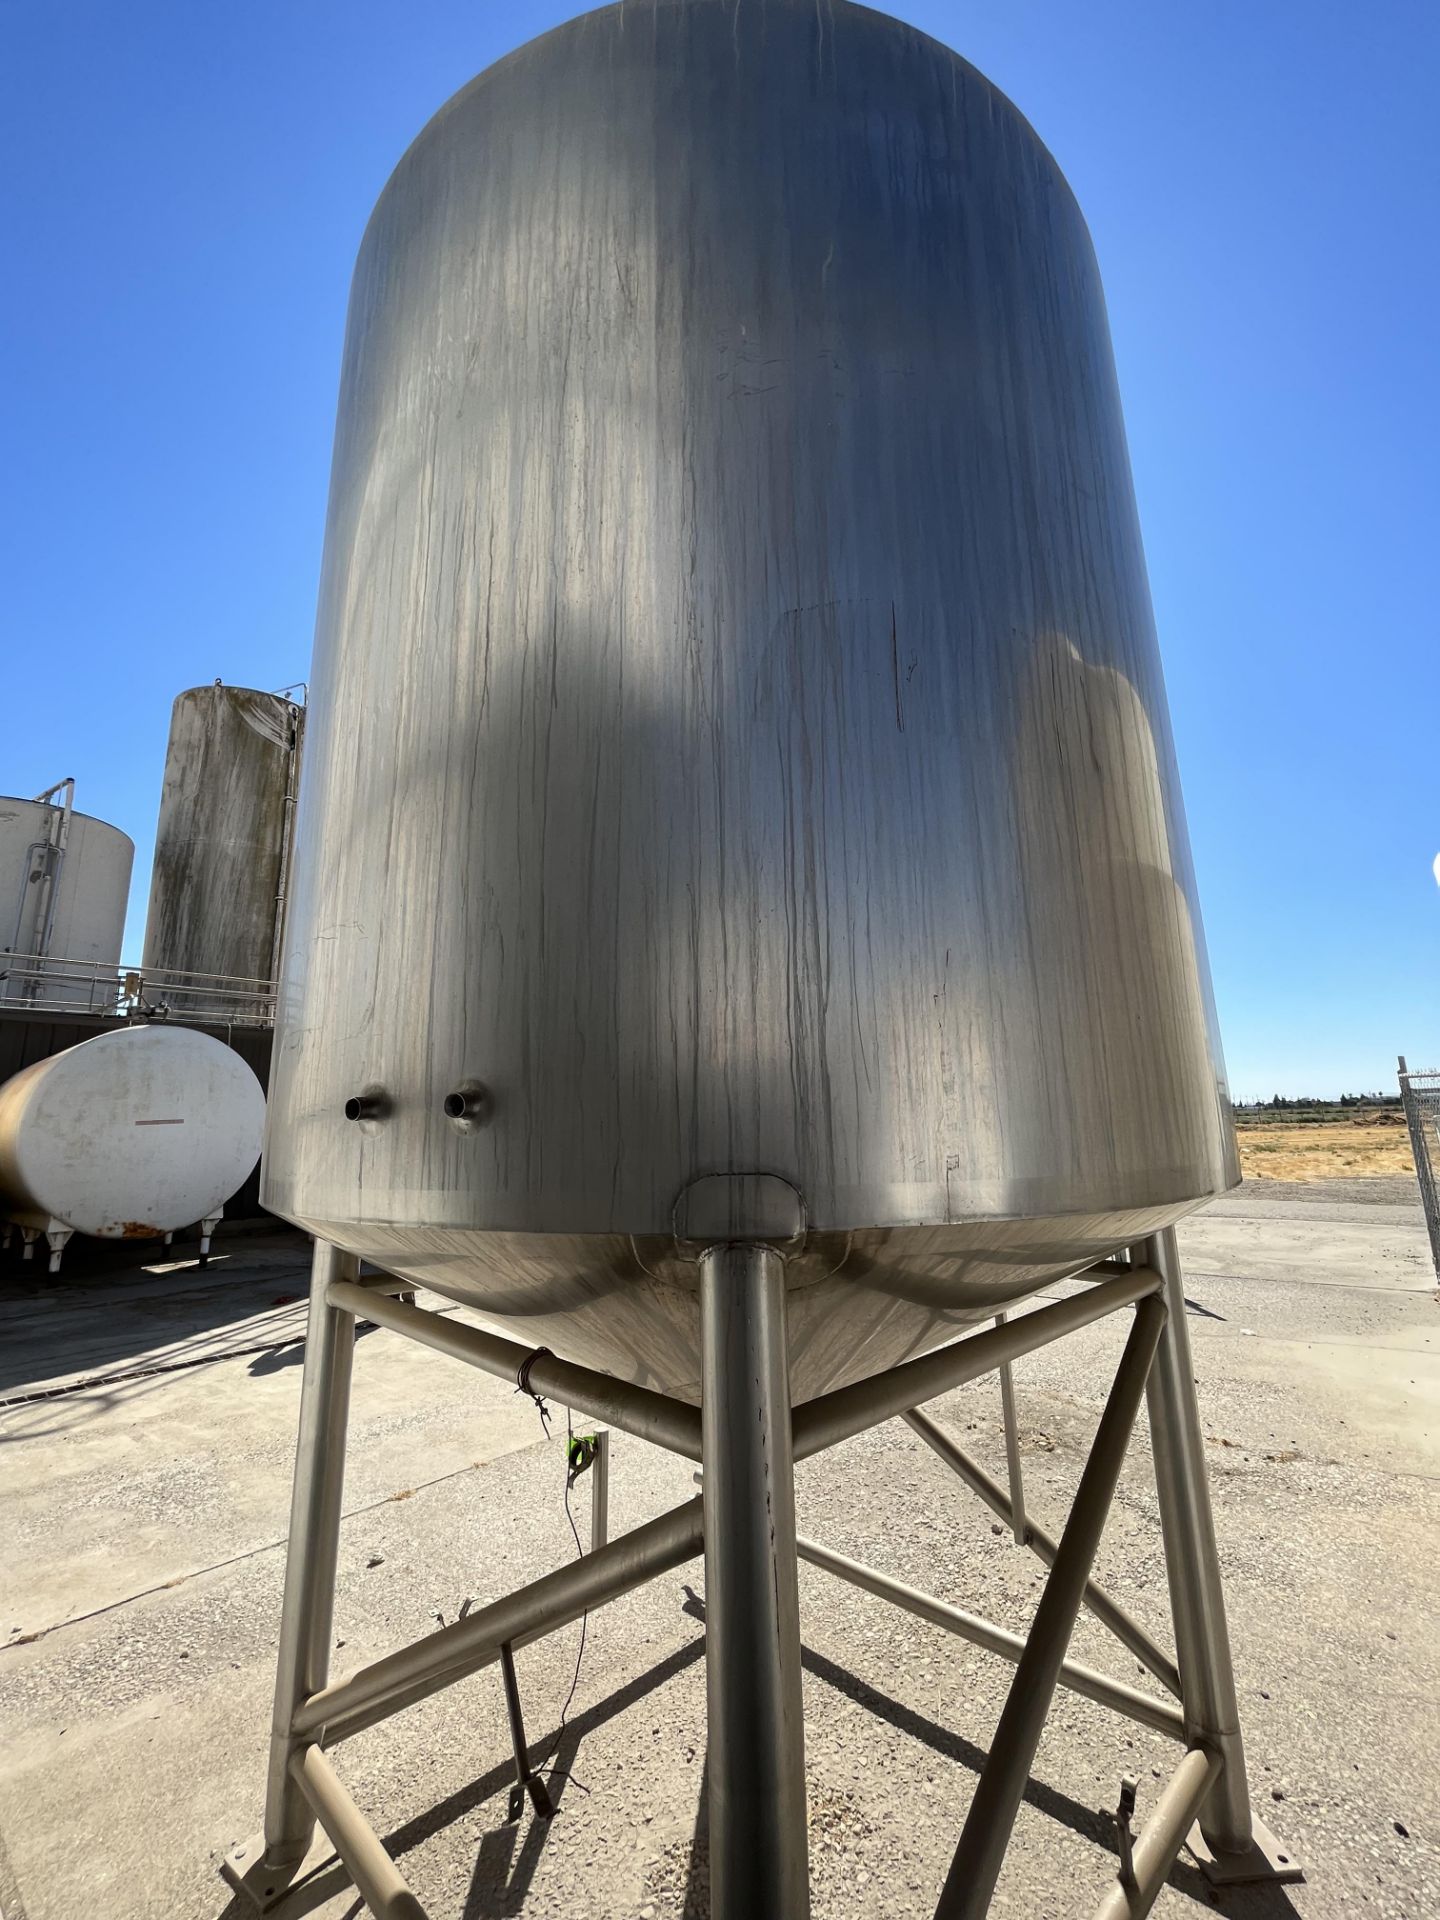 Sani-Fab Jacketed S/S Tank, Tank Dims.: Aprox. 7 ft. Tall x 80” Dia., Cone Bottom, Mounted on S/S - Image 8 of 9